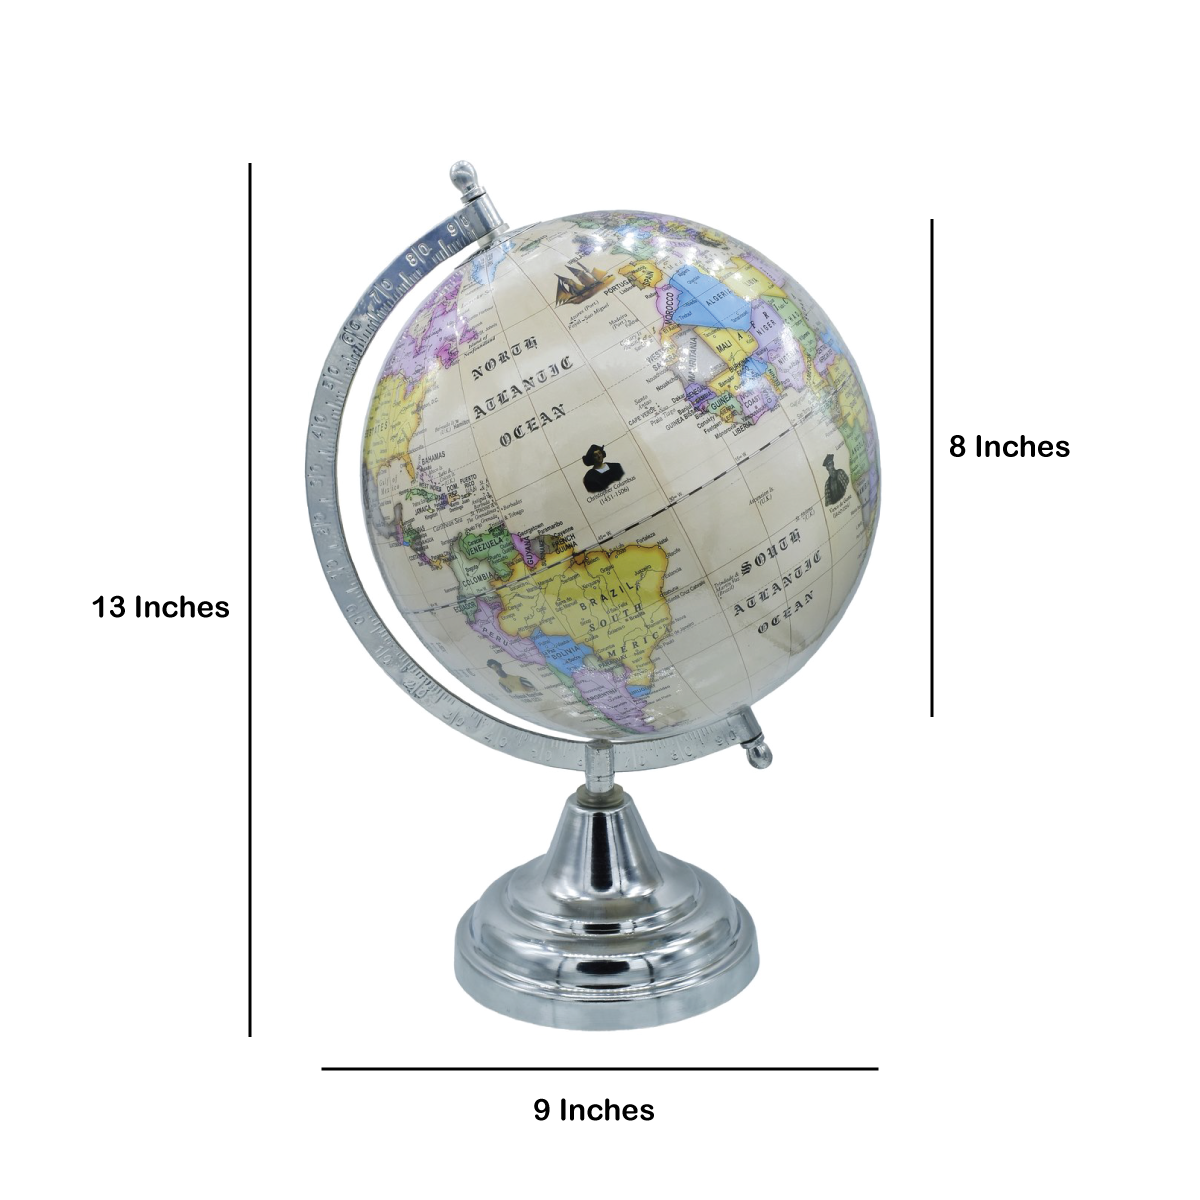 Silver Base 8 Inch Antique World Globe Table Top - For Shops, Schools, Corporates, Office Use, Corporate Gifting JAWGAW8IN